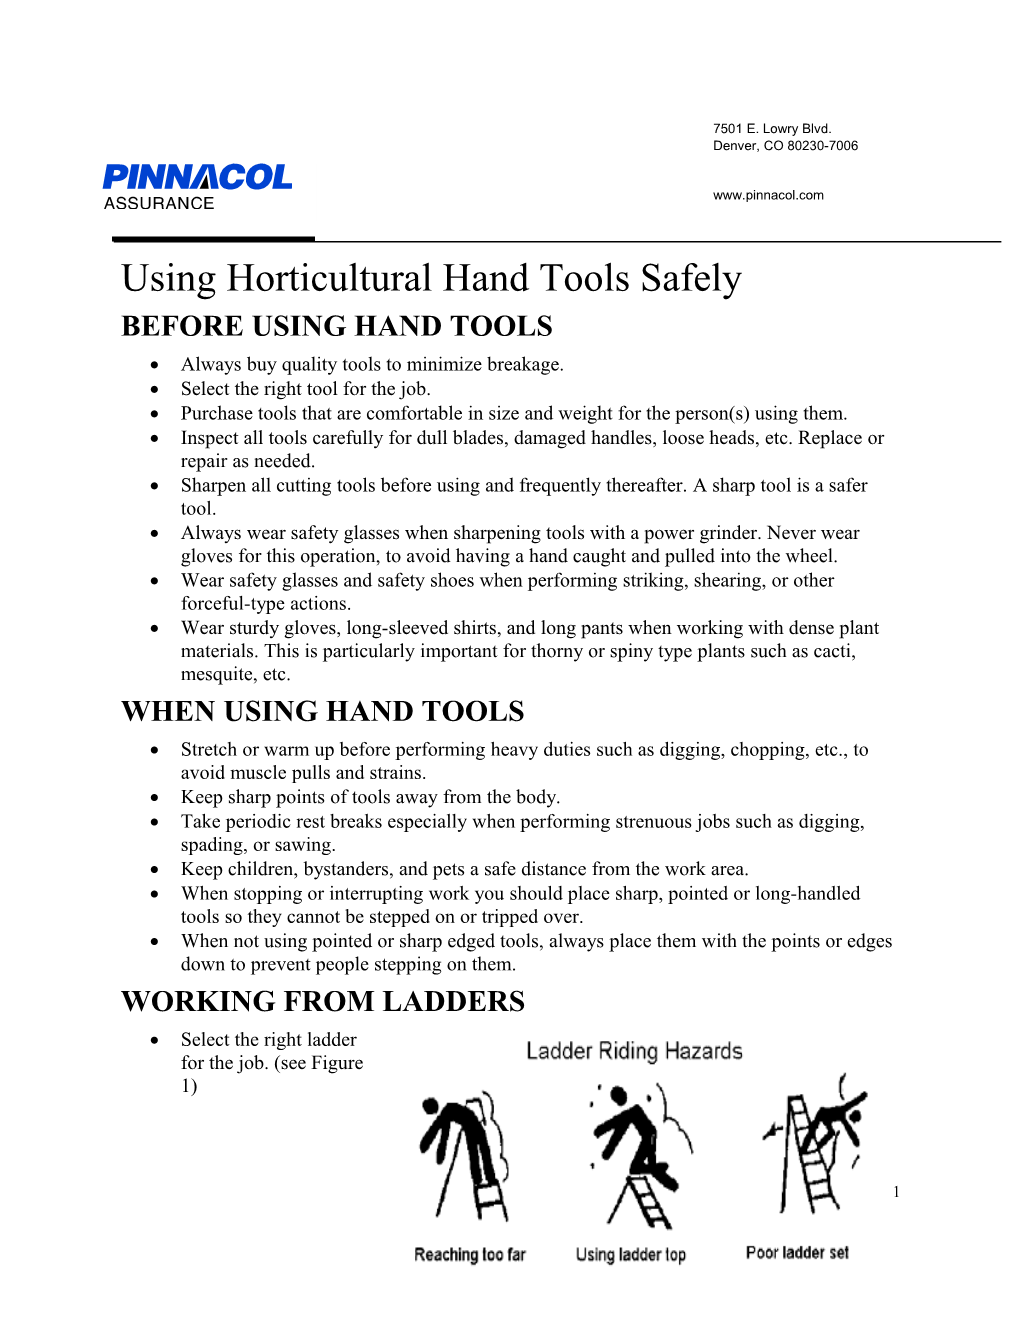 Using Horticultural Hand Tools Safely